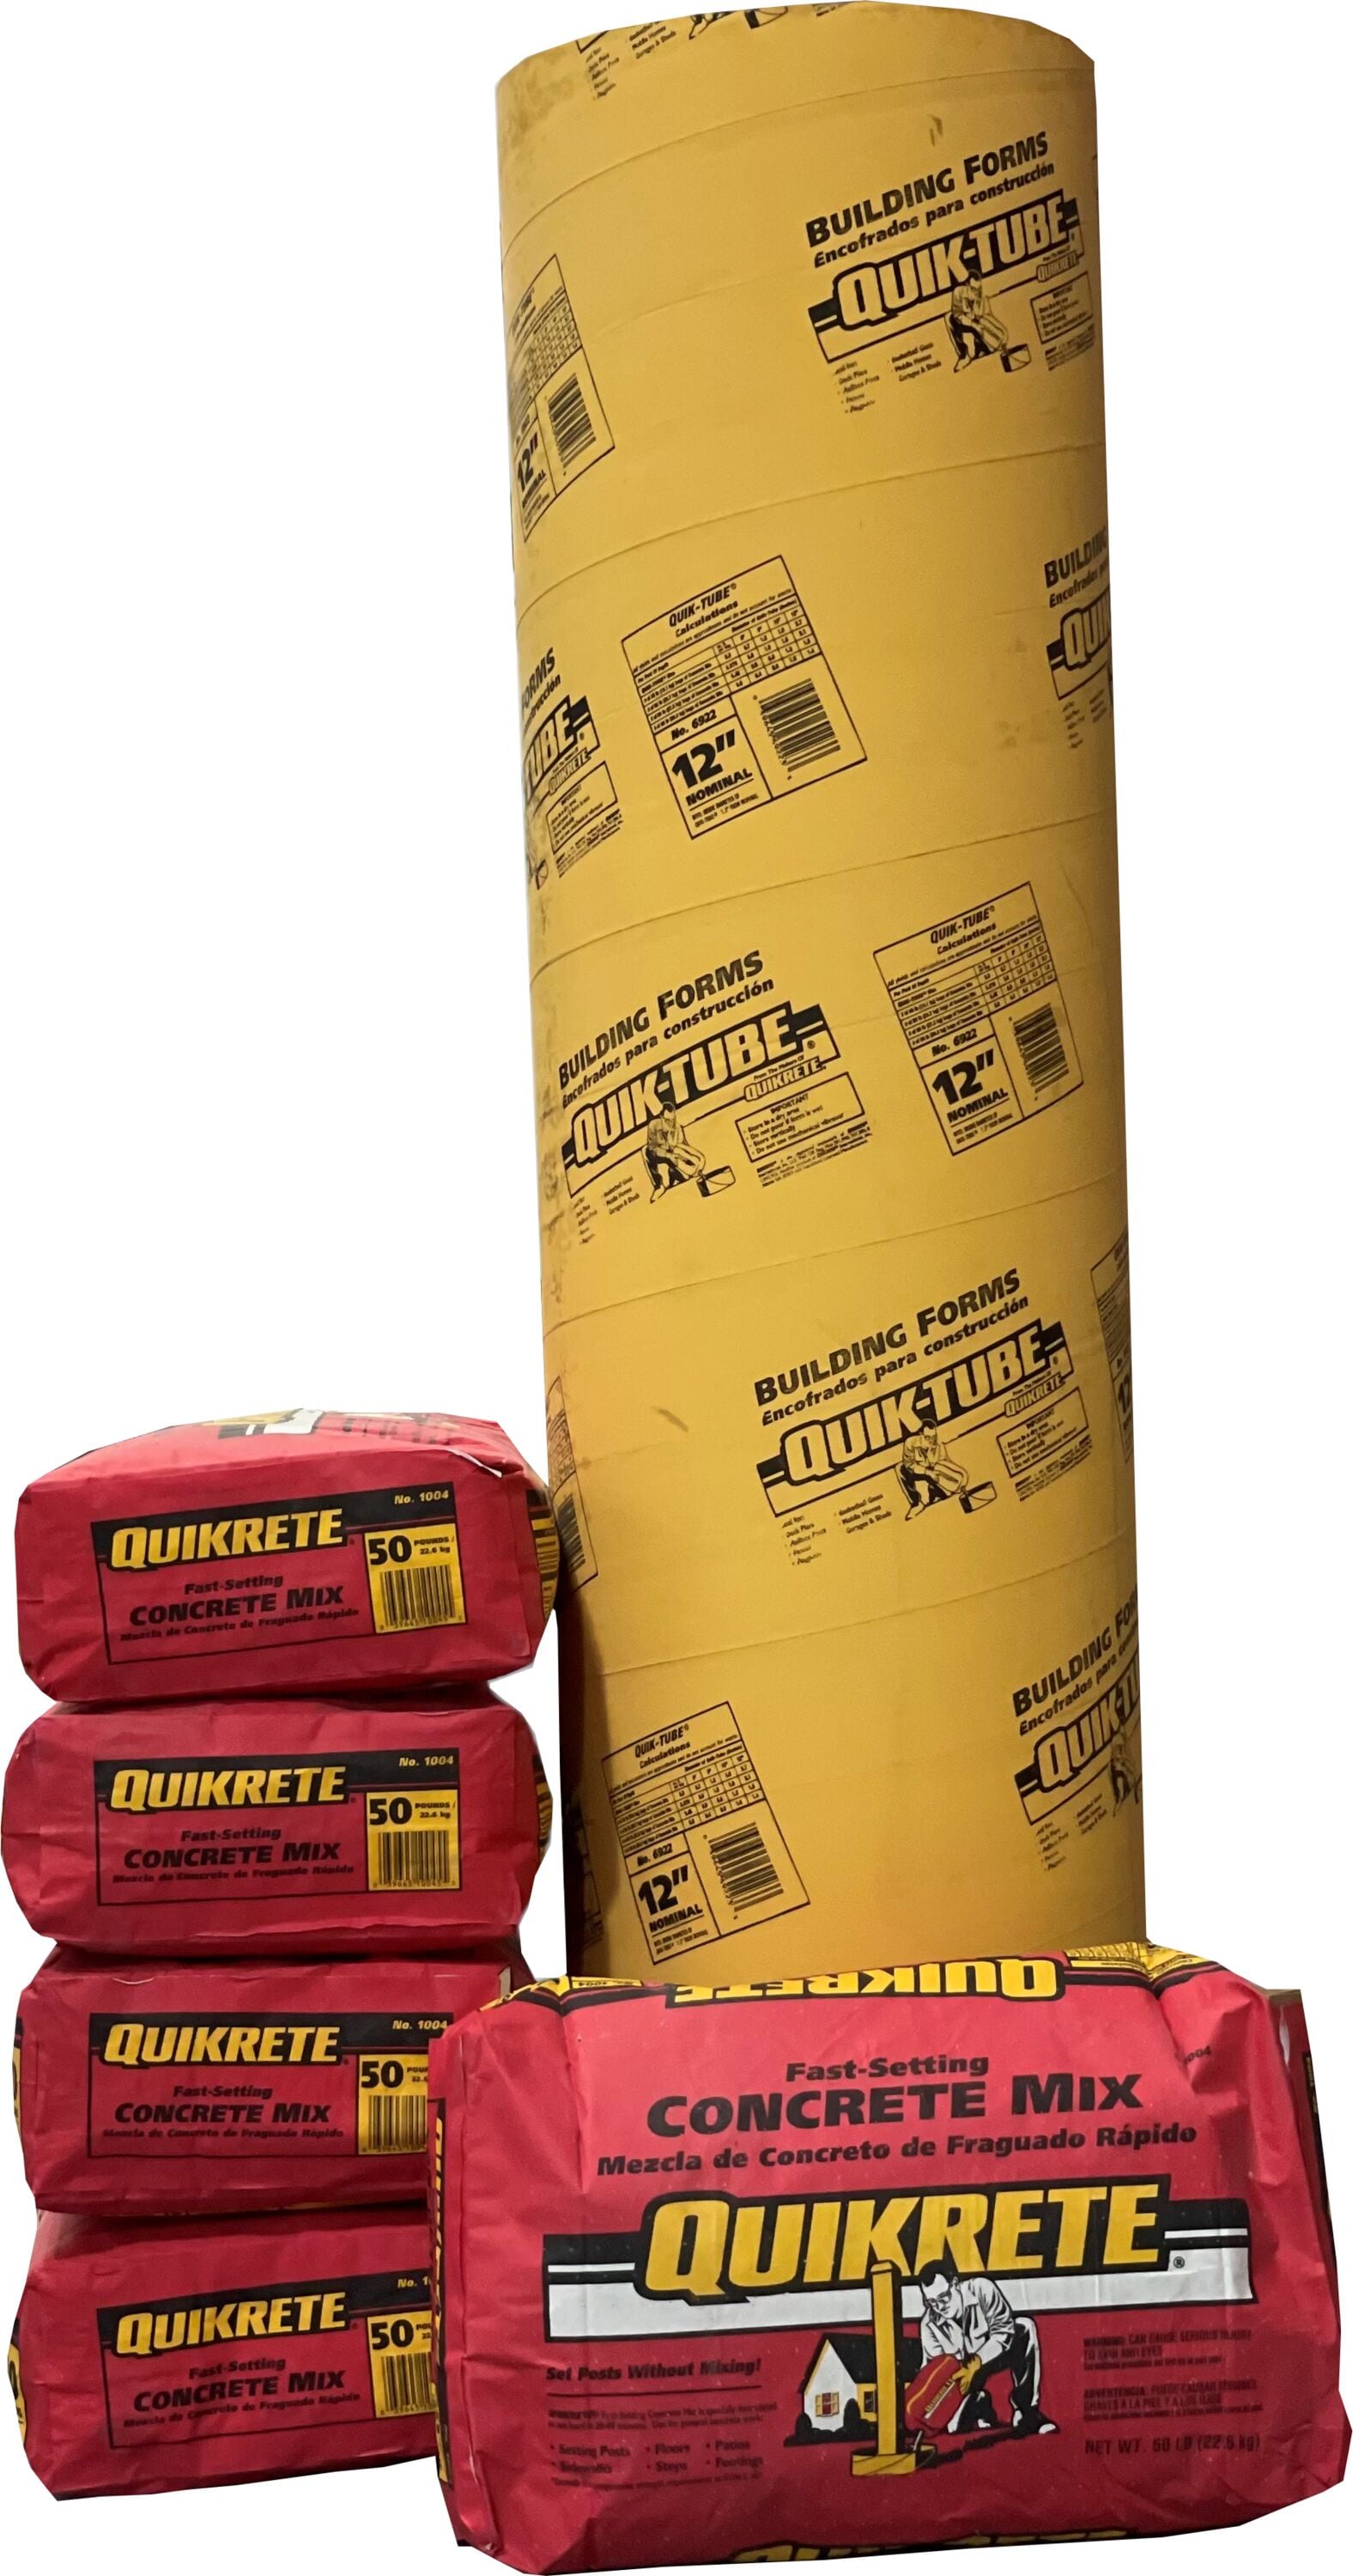  QUIKRETE Quick Setting Cement for Concrete Sculpting, Repairing  Steps, Curbs, Floors, Retaining Walls, and More, Just Add Water, 10 Pound  Pail : Industrial & Scientific